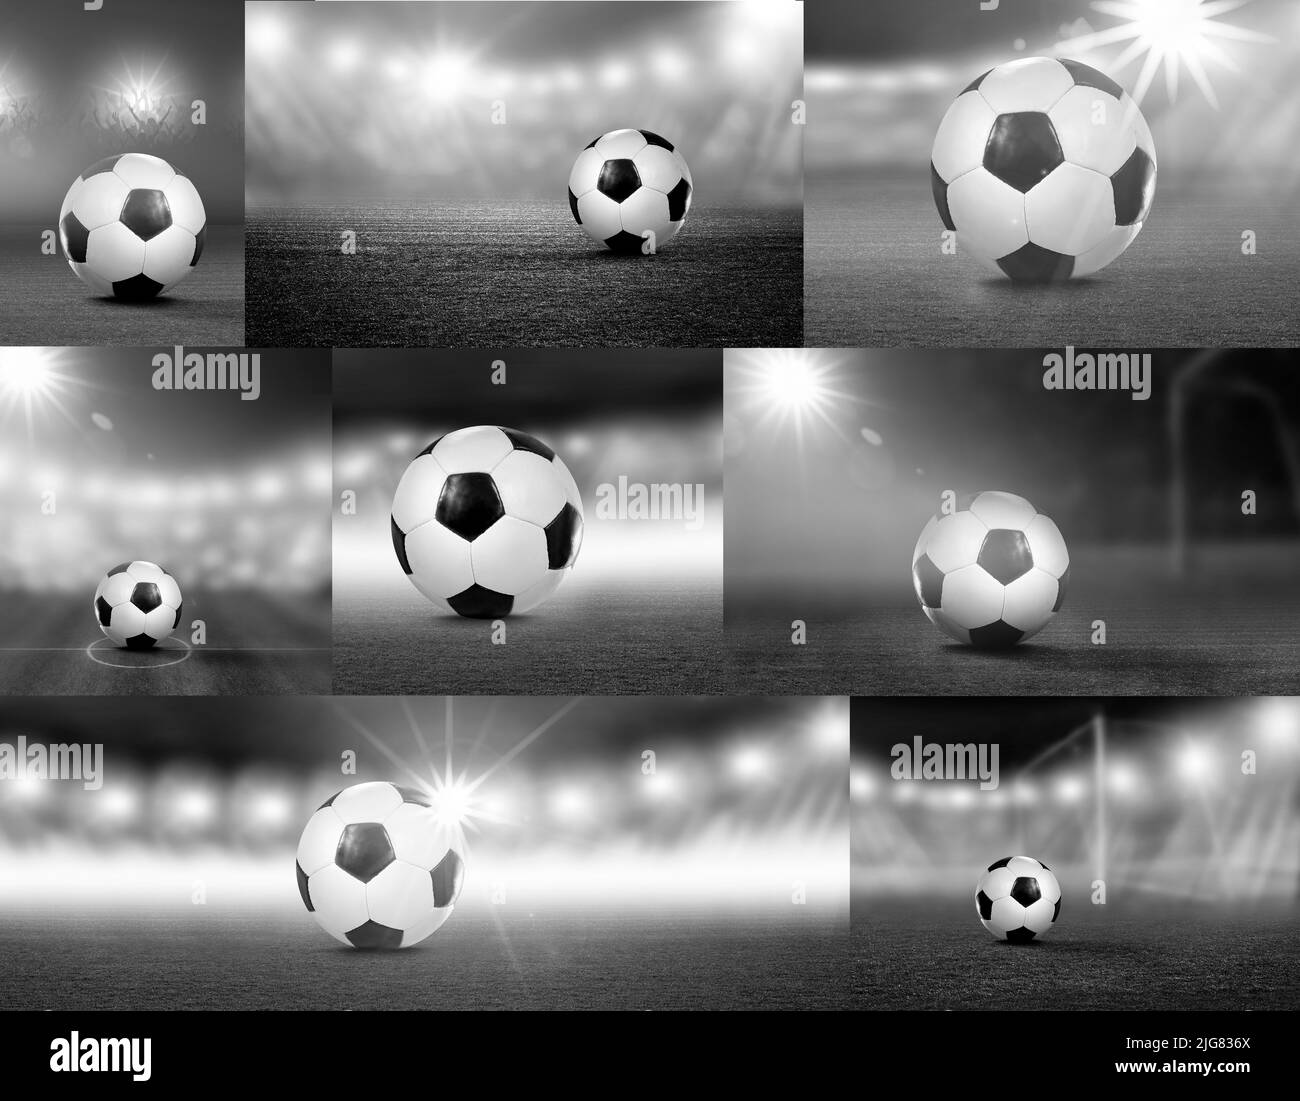 black and white soccer photography